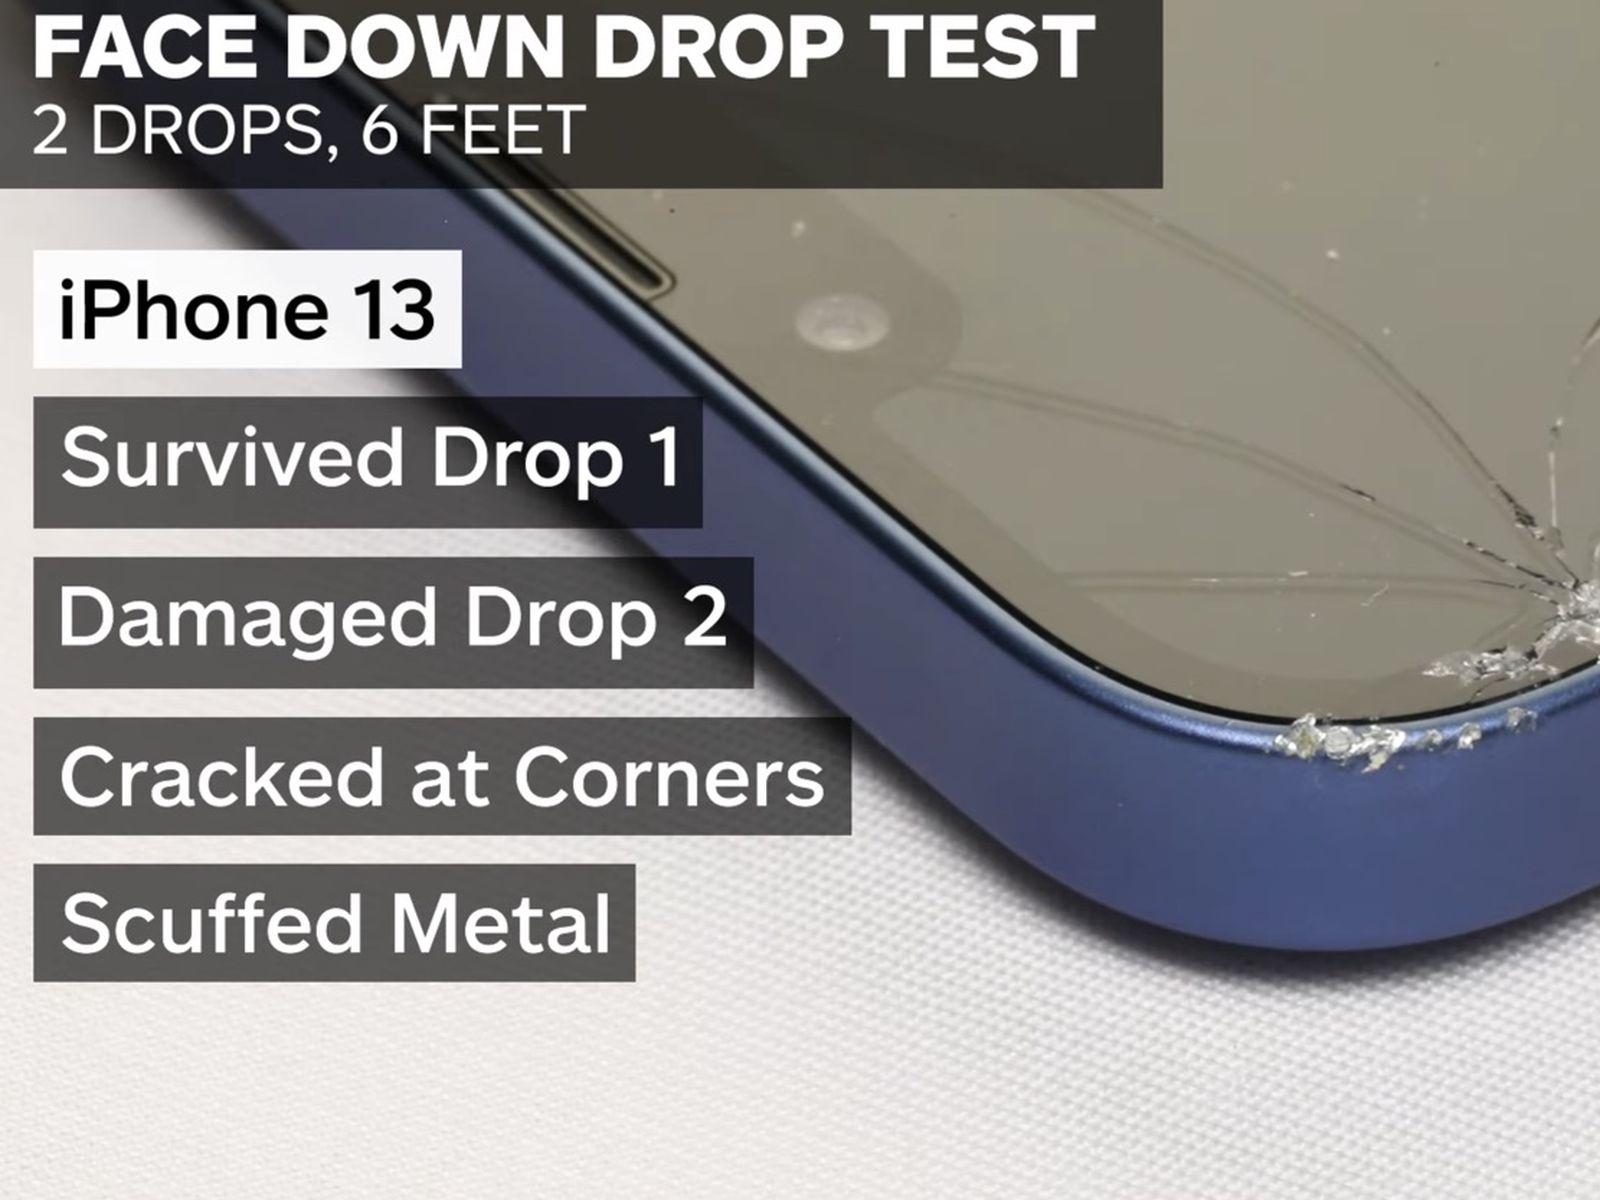 How many drops can iPhone 13 survive?